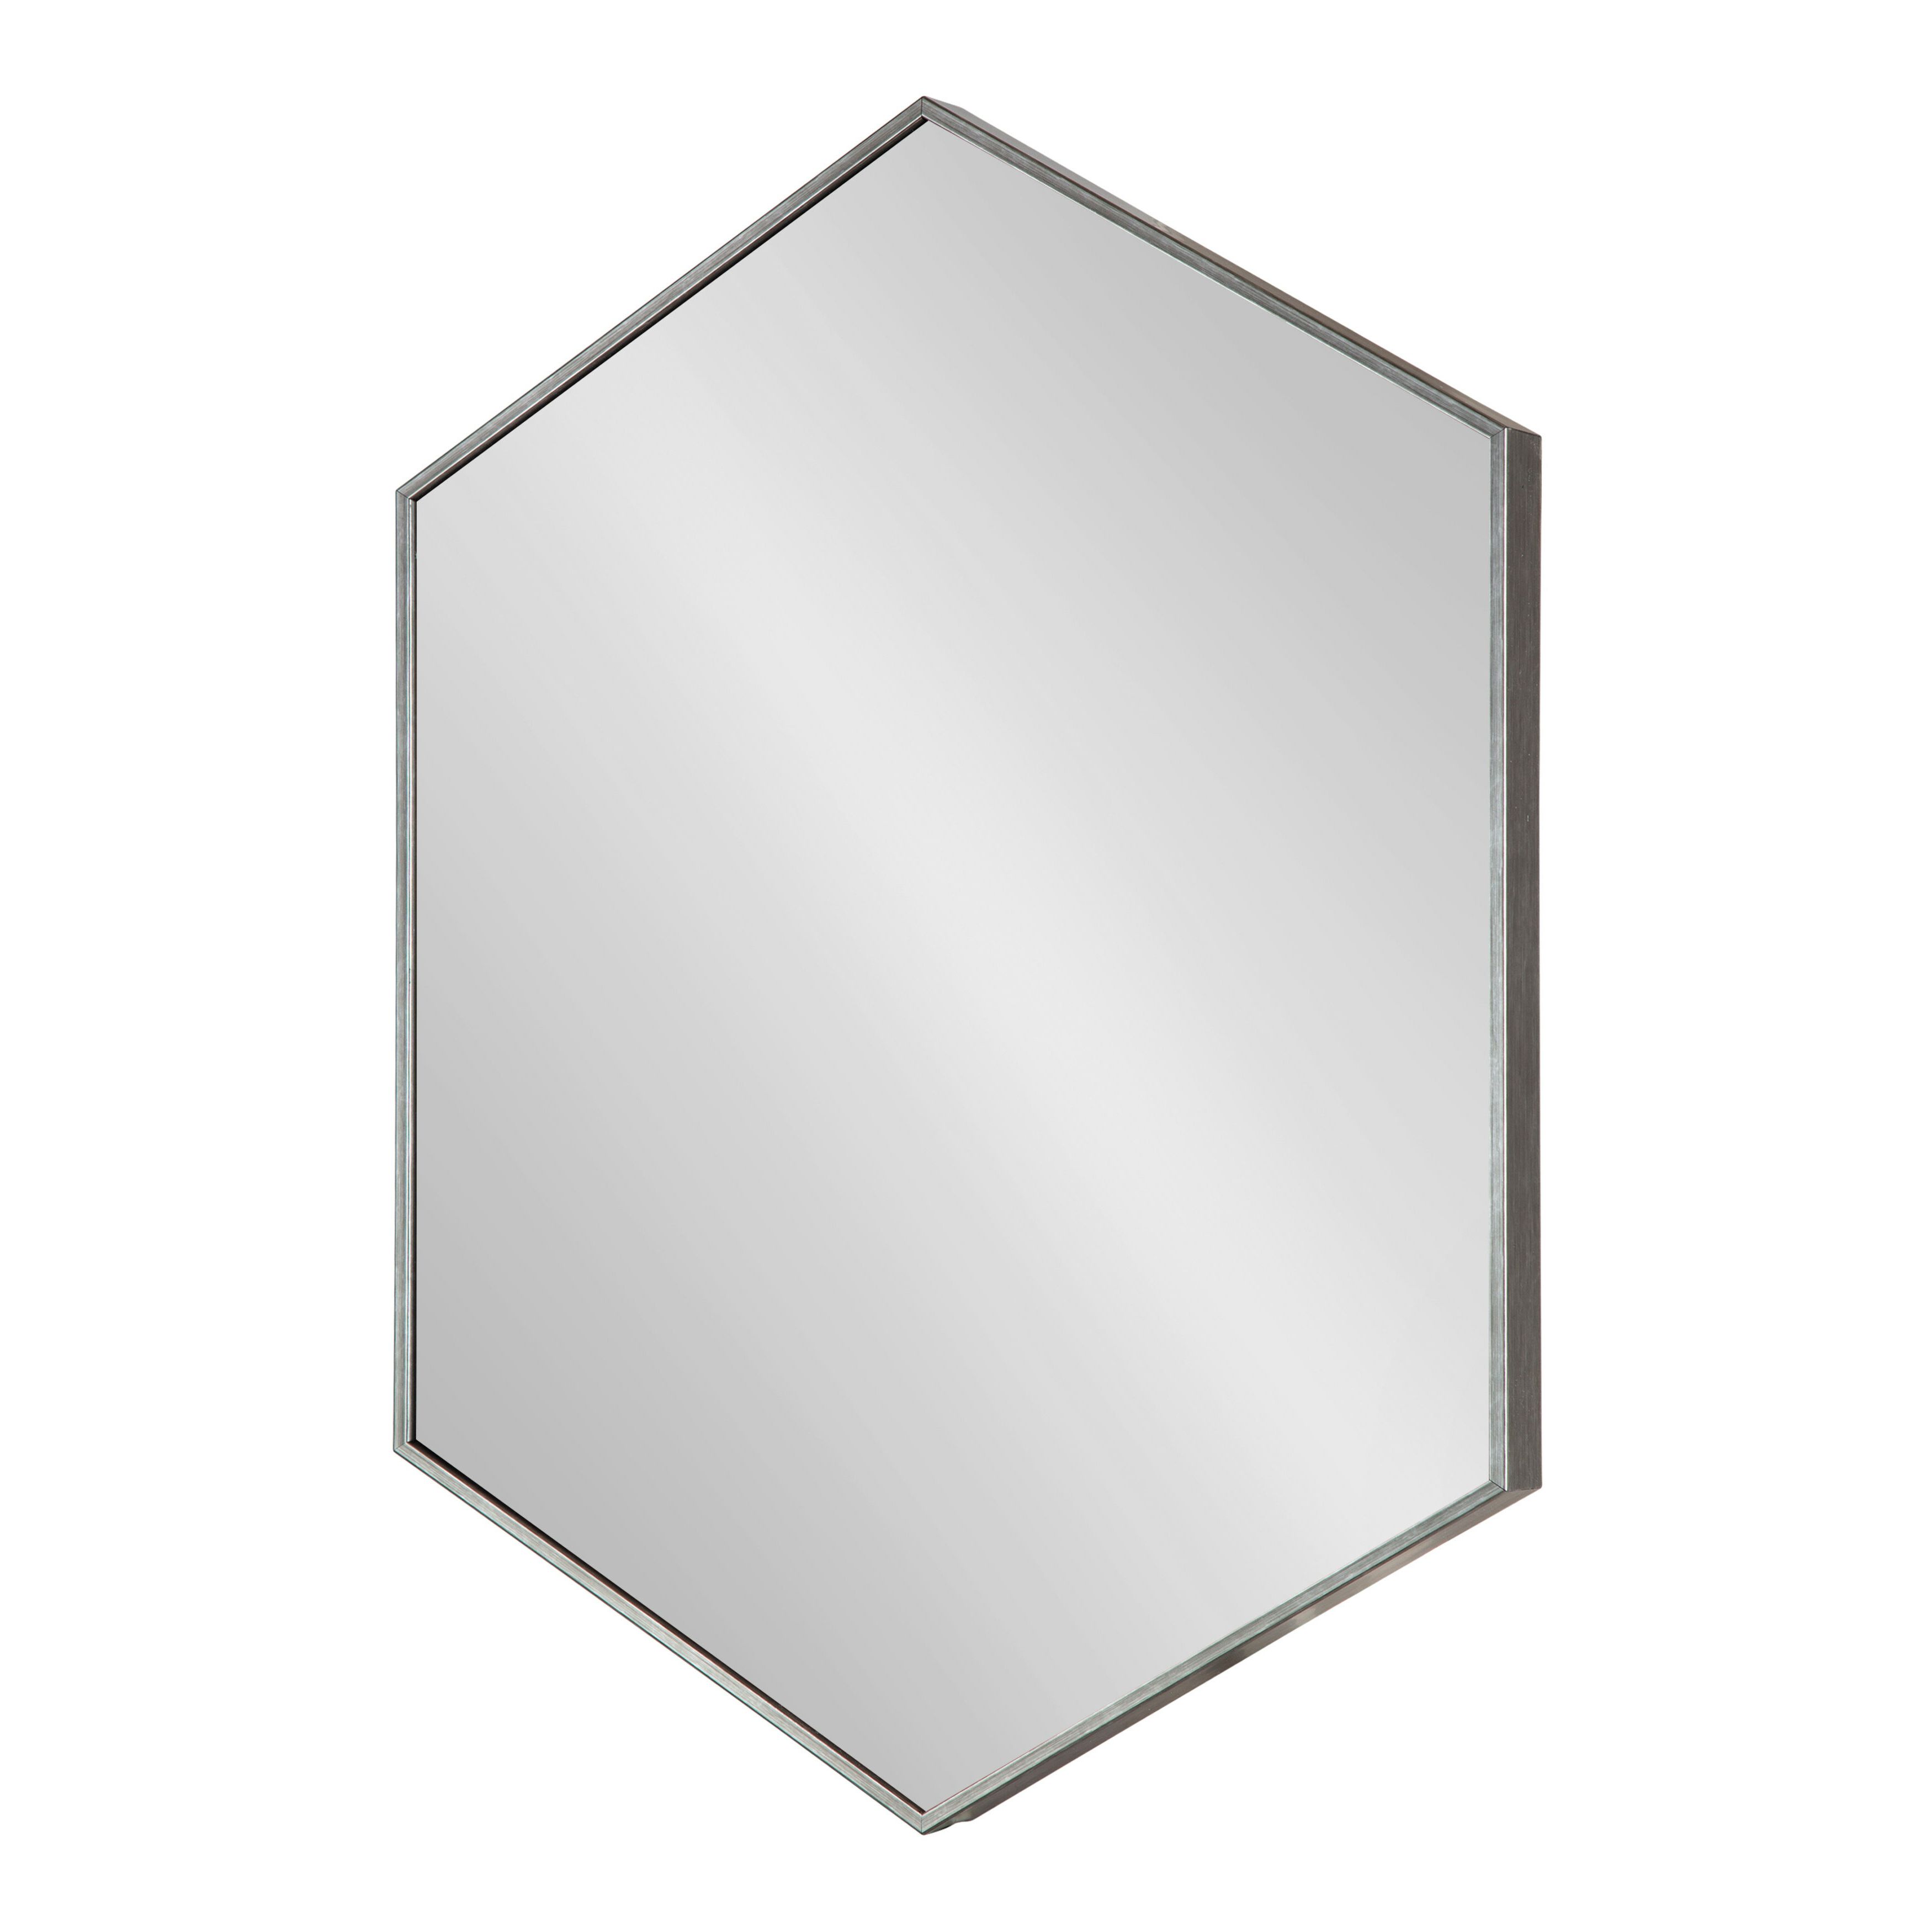 Newest Zaliki Mid Century Hexagon Accent Mirror Intended For Lugo Rectangle Accent Mirrors (View 18 of 20)